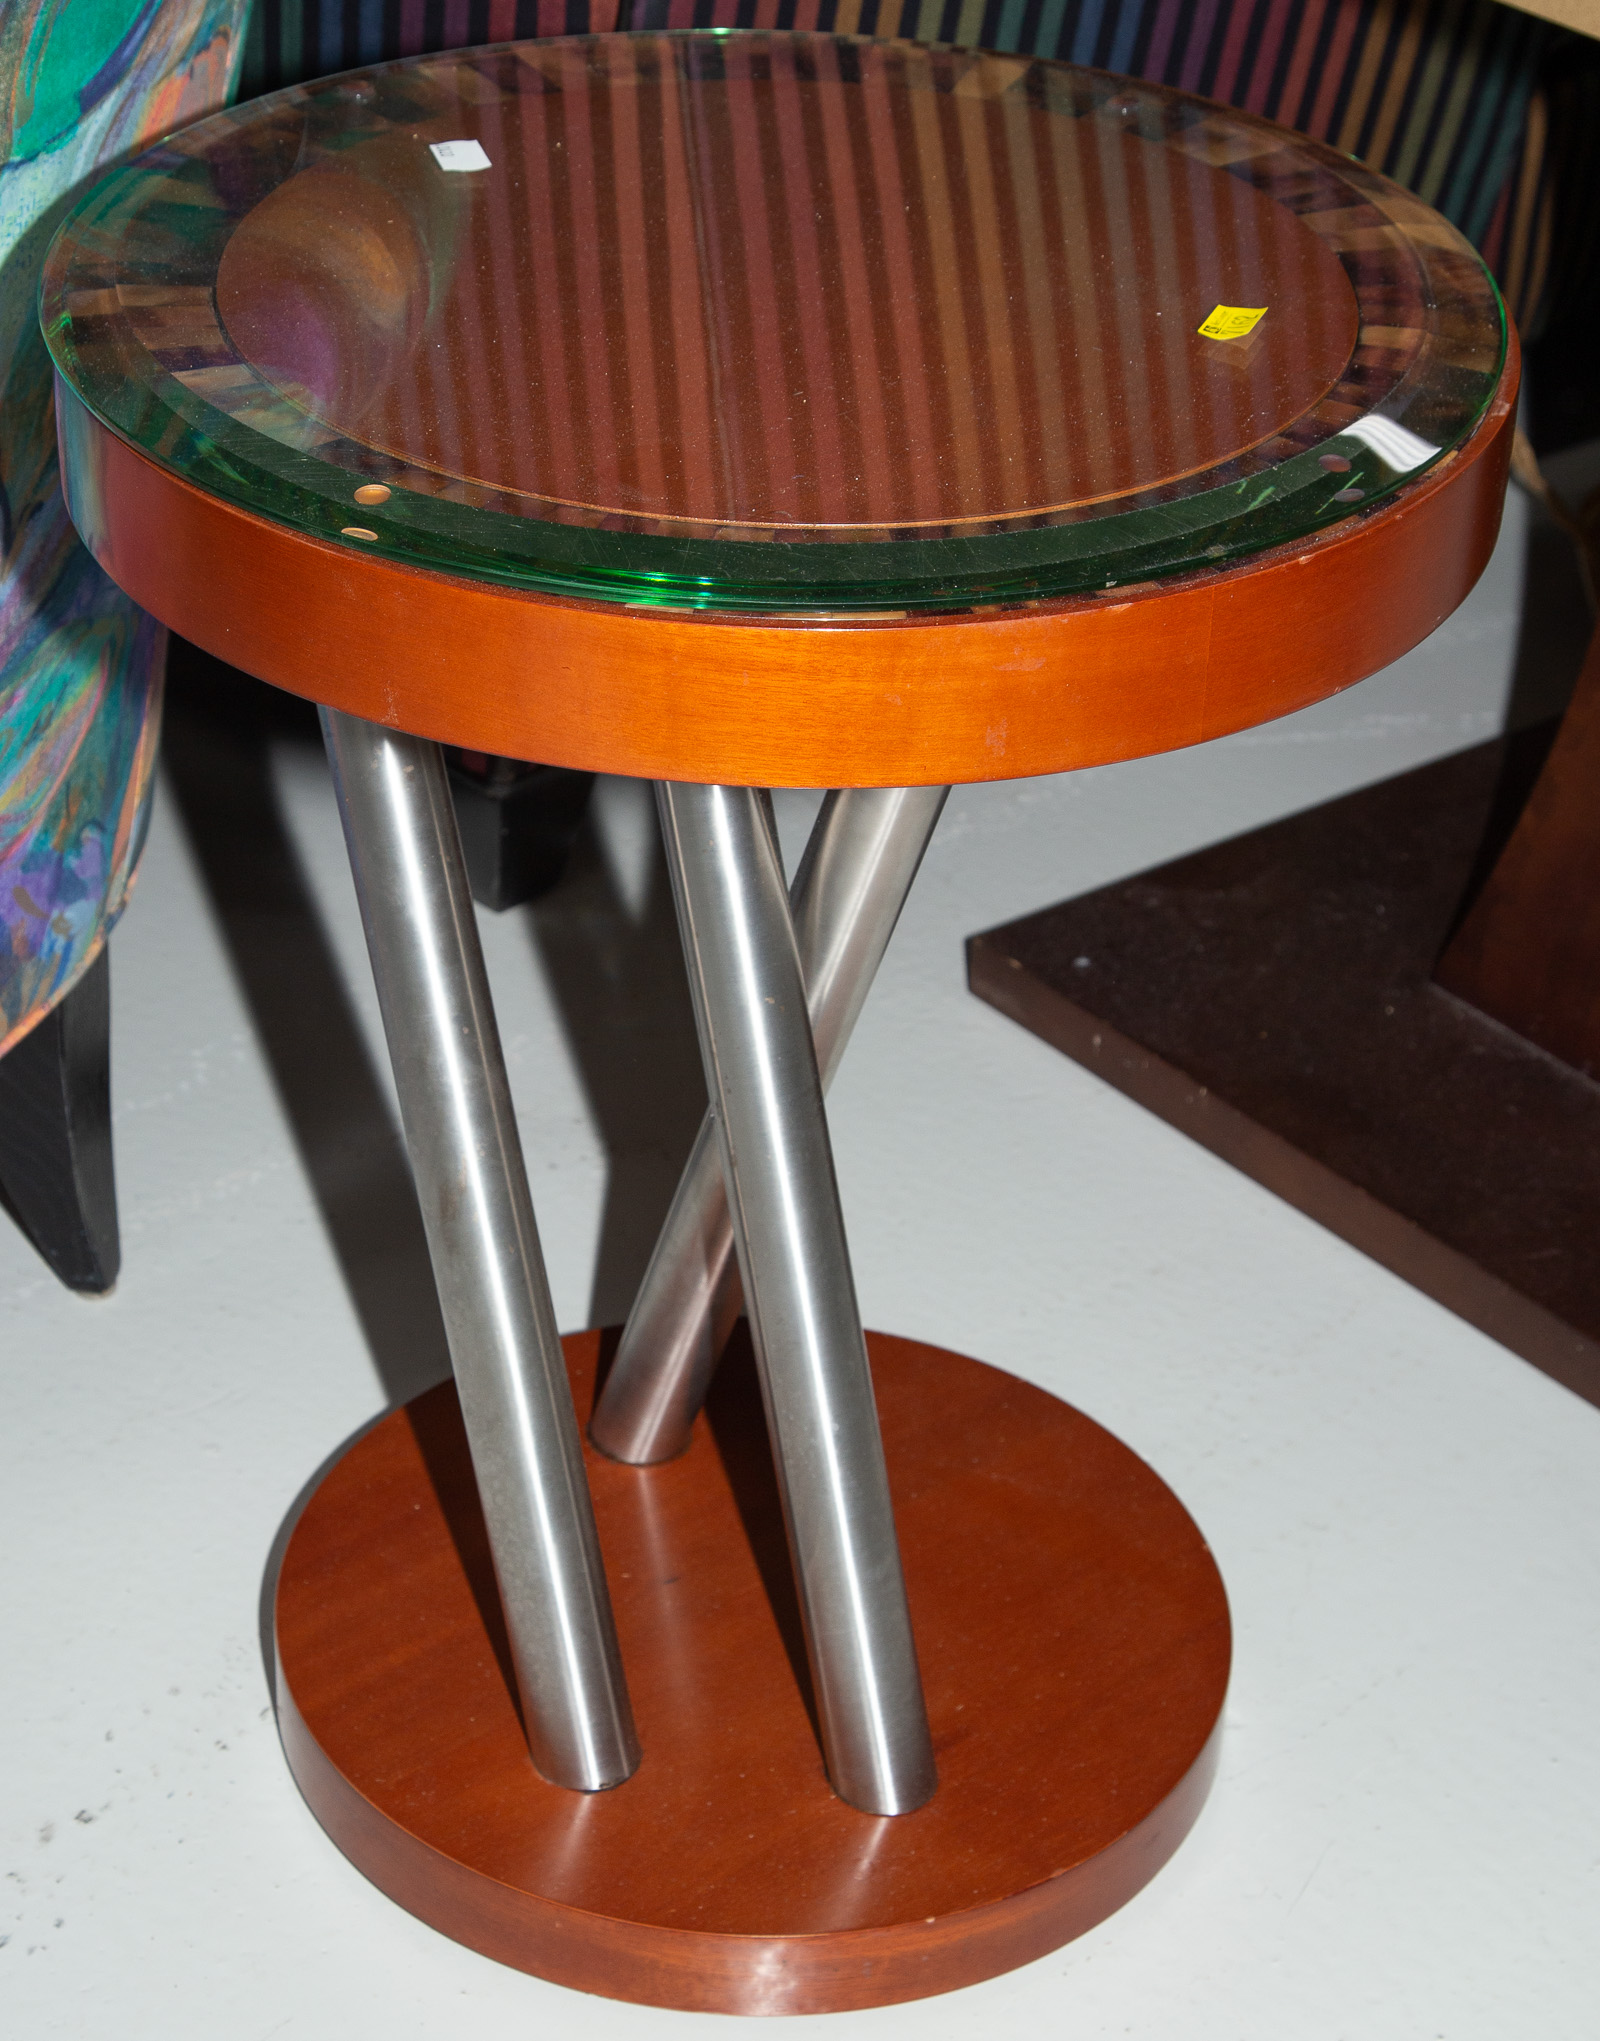 LAMP TABLE With glass cover, 22 1/2